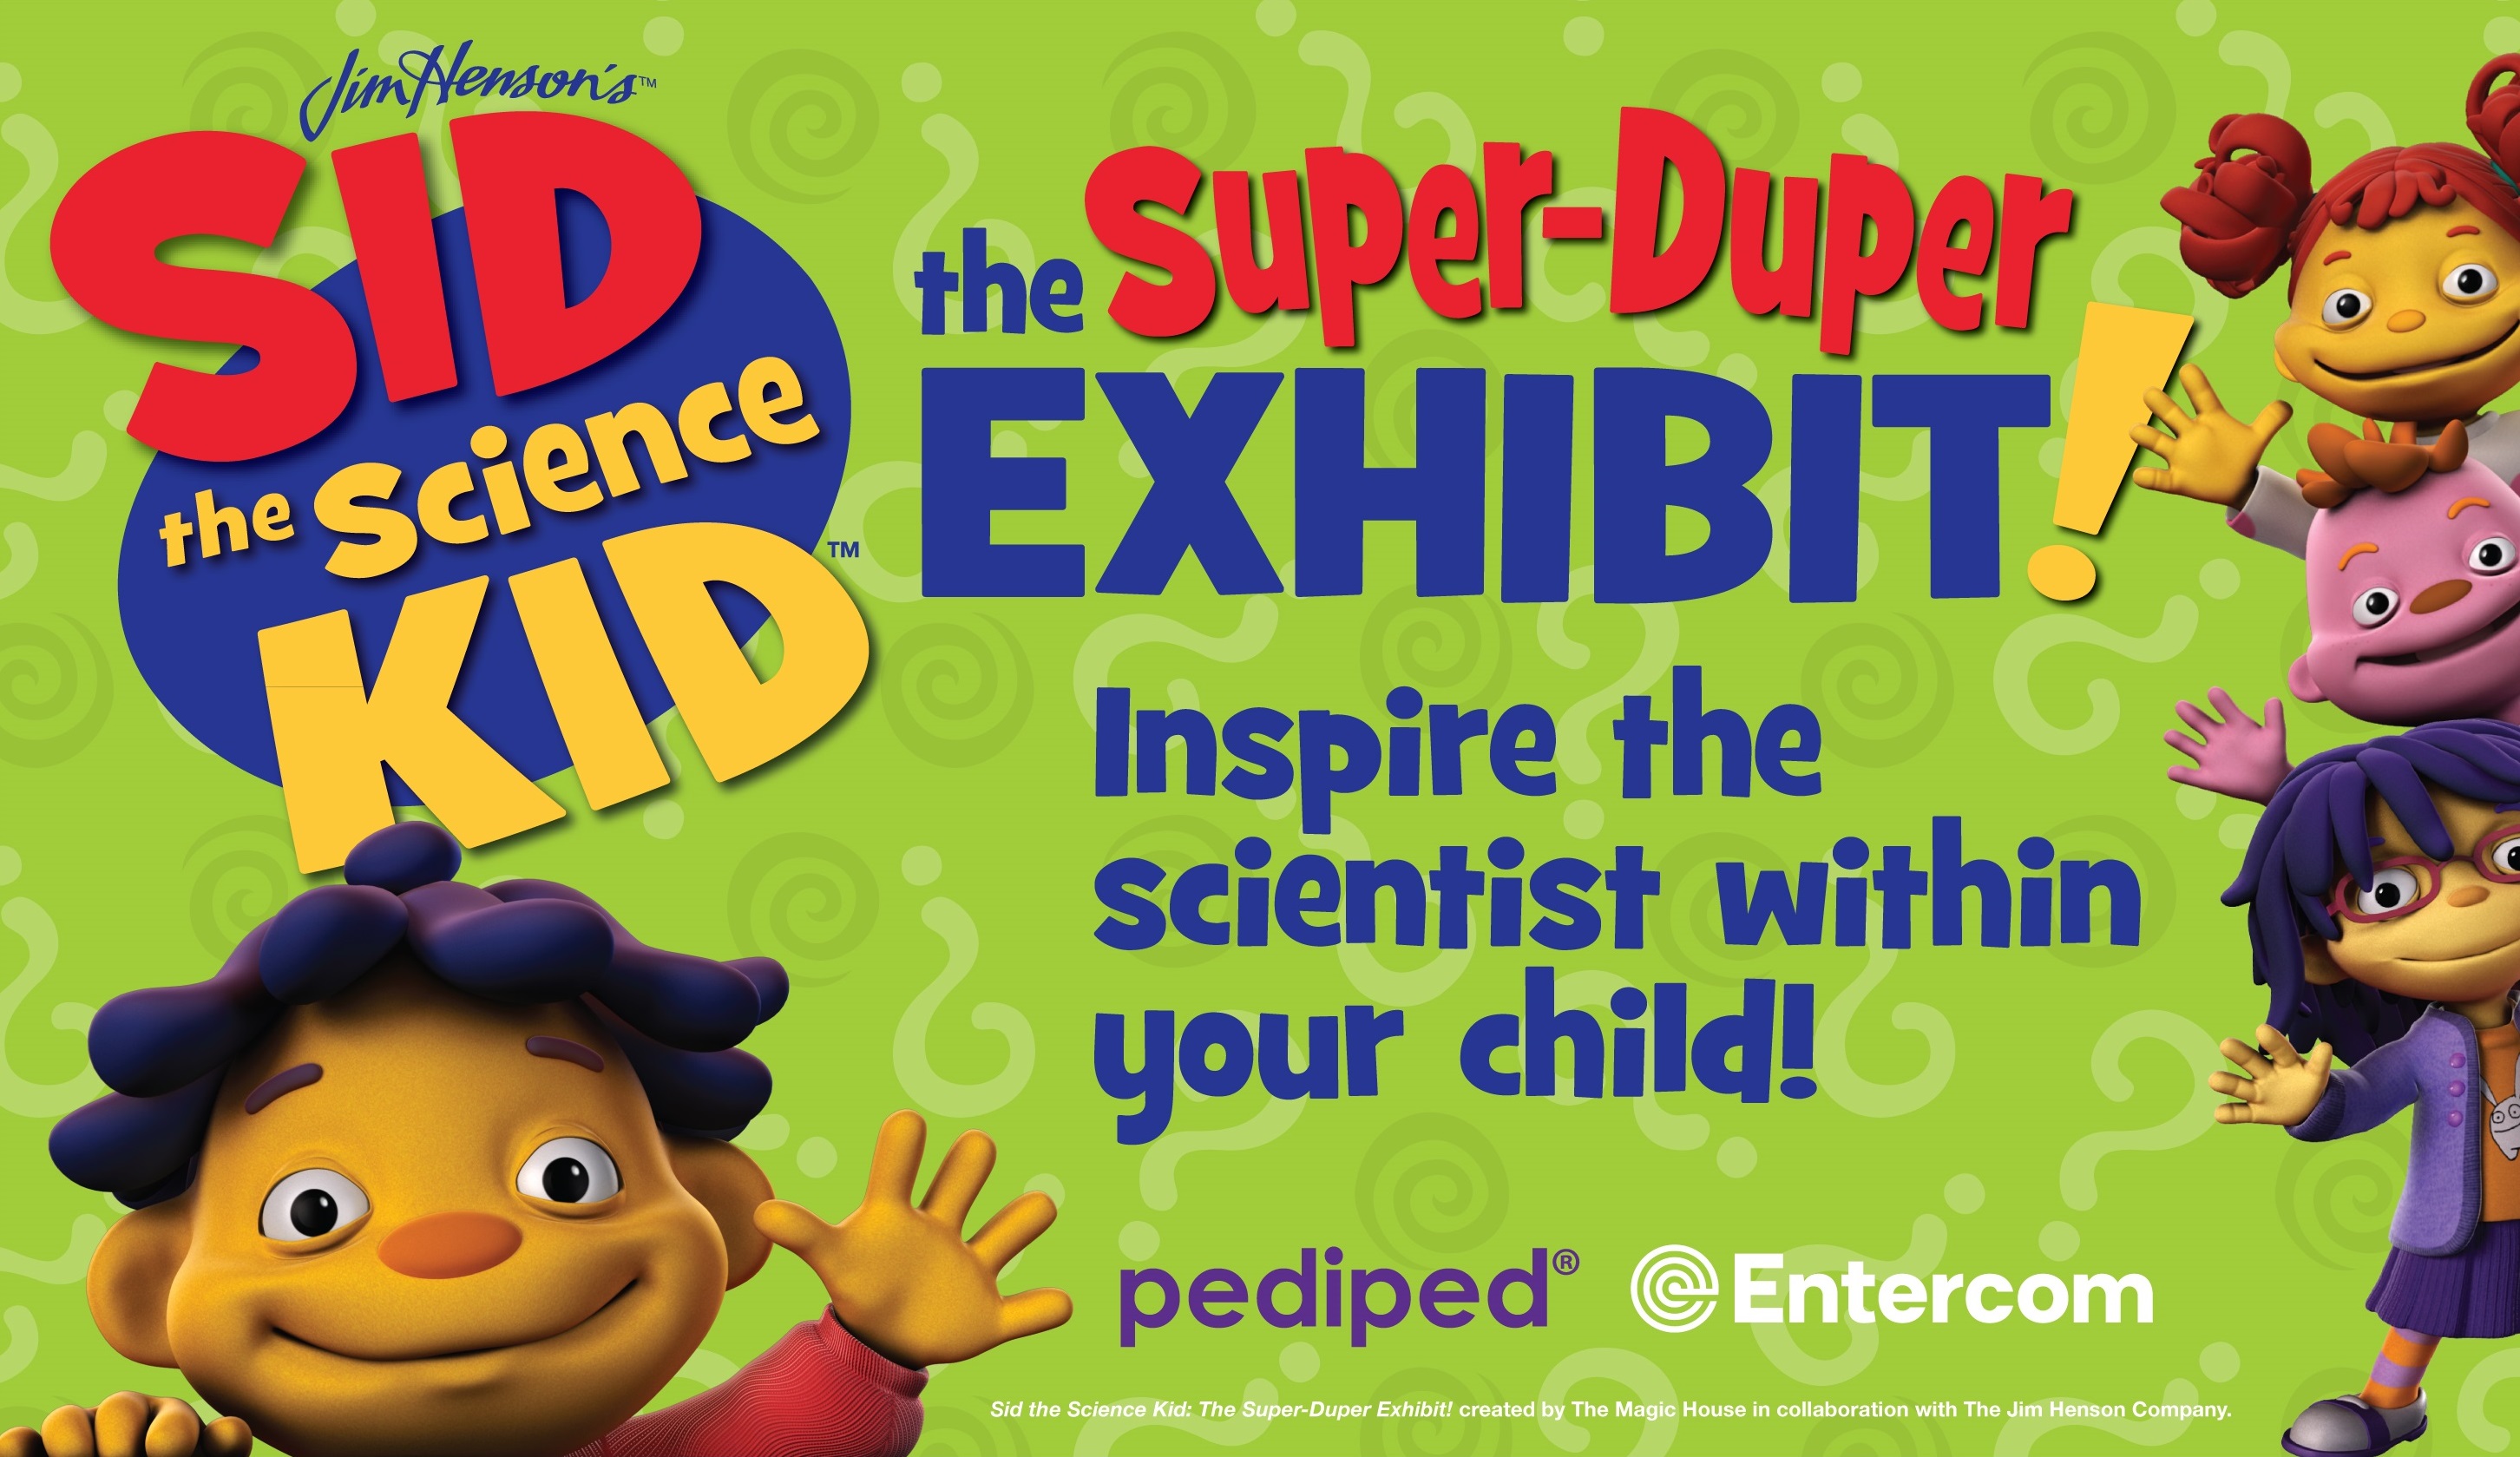 2. Sid the Science Kid: The Super-Duper Exhibit - wide 3